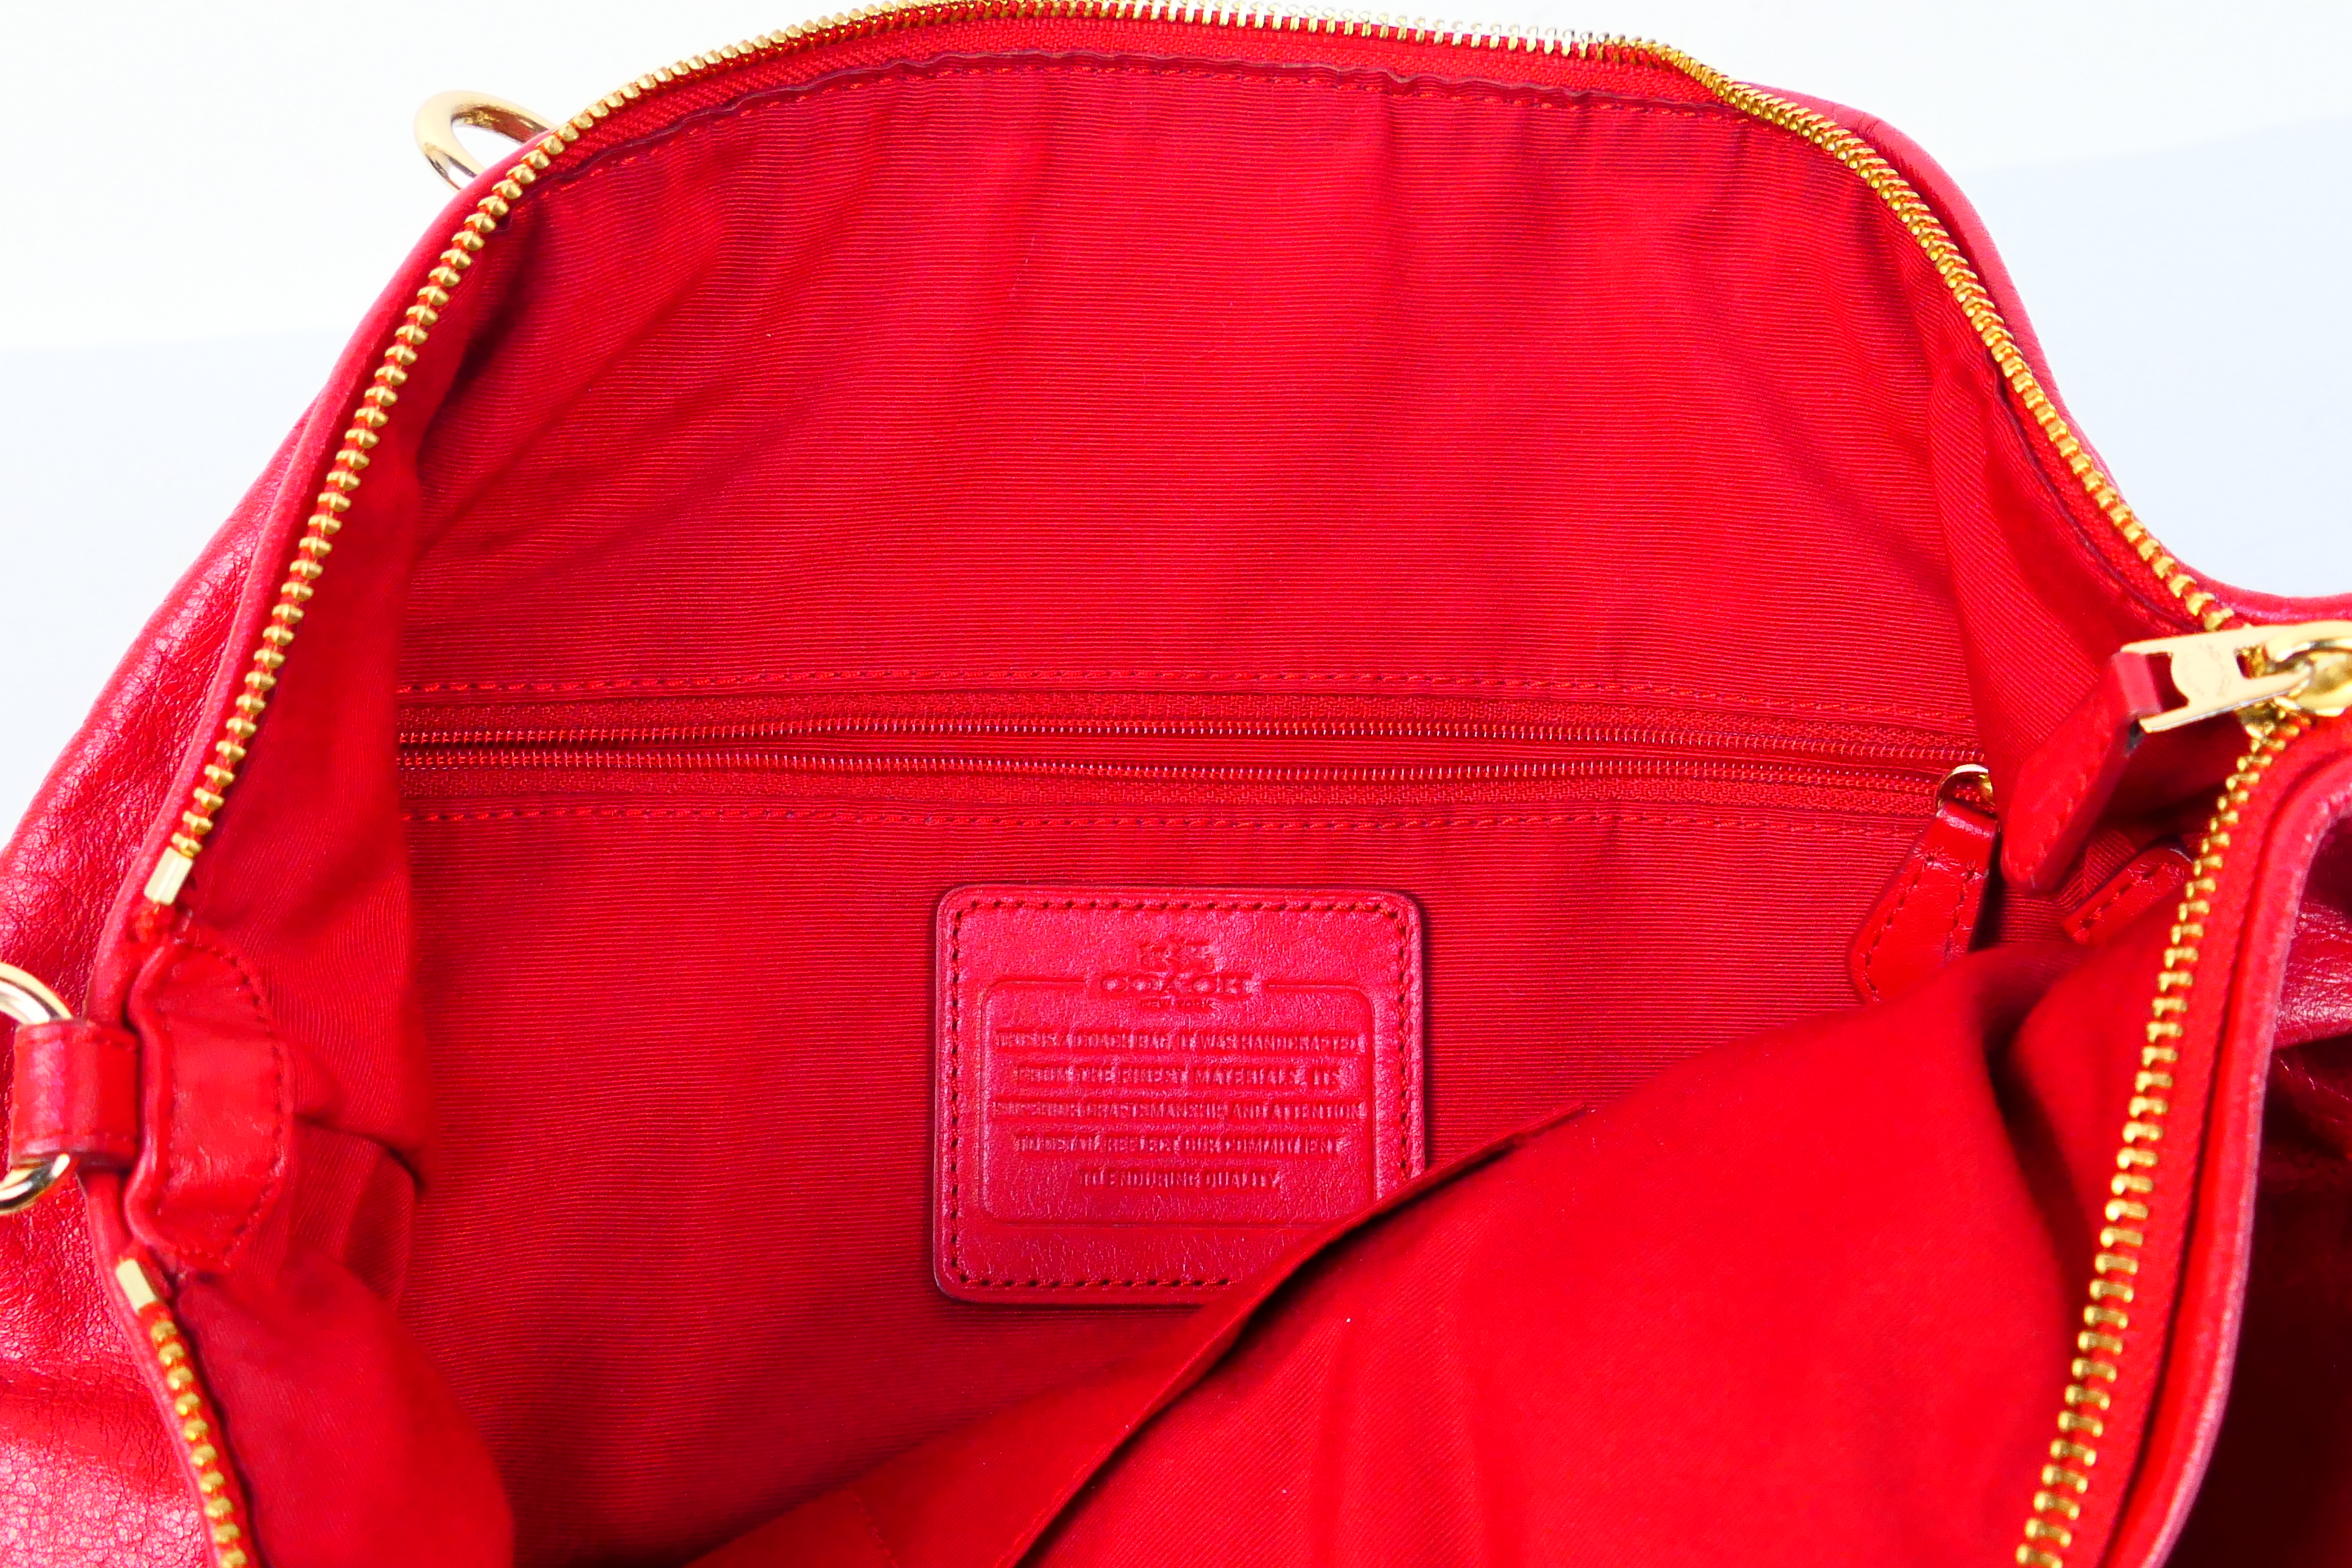 Coach New York - a Red Coach handbag, labelled with makers mark, with shoulder strap, - Image 6 of 7